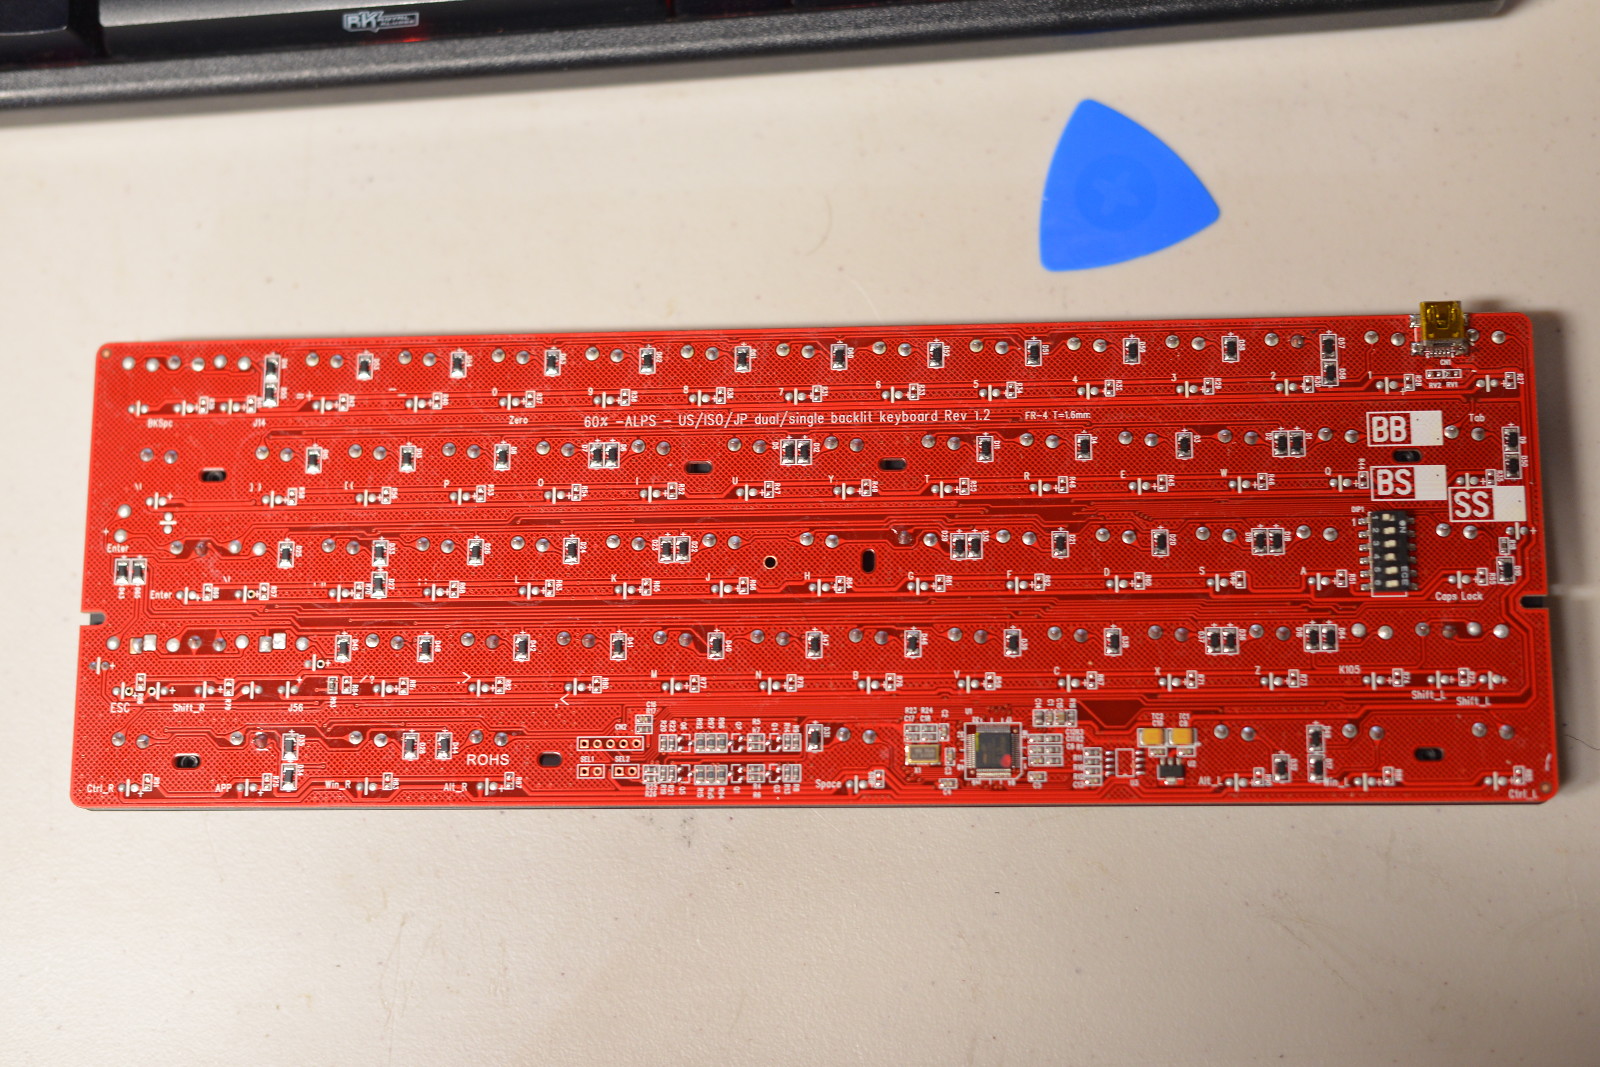 Back side of V60 PCB. Diodes and unknown controller visible.